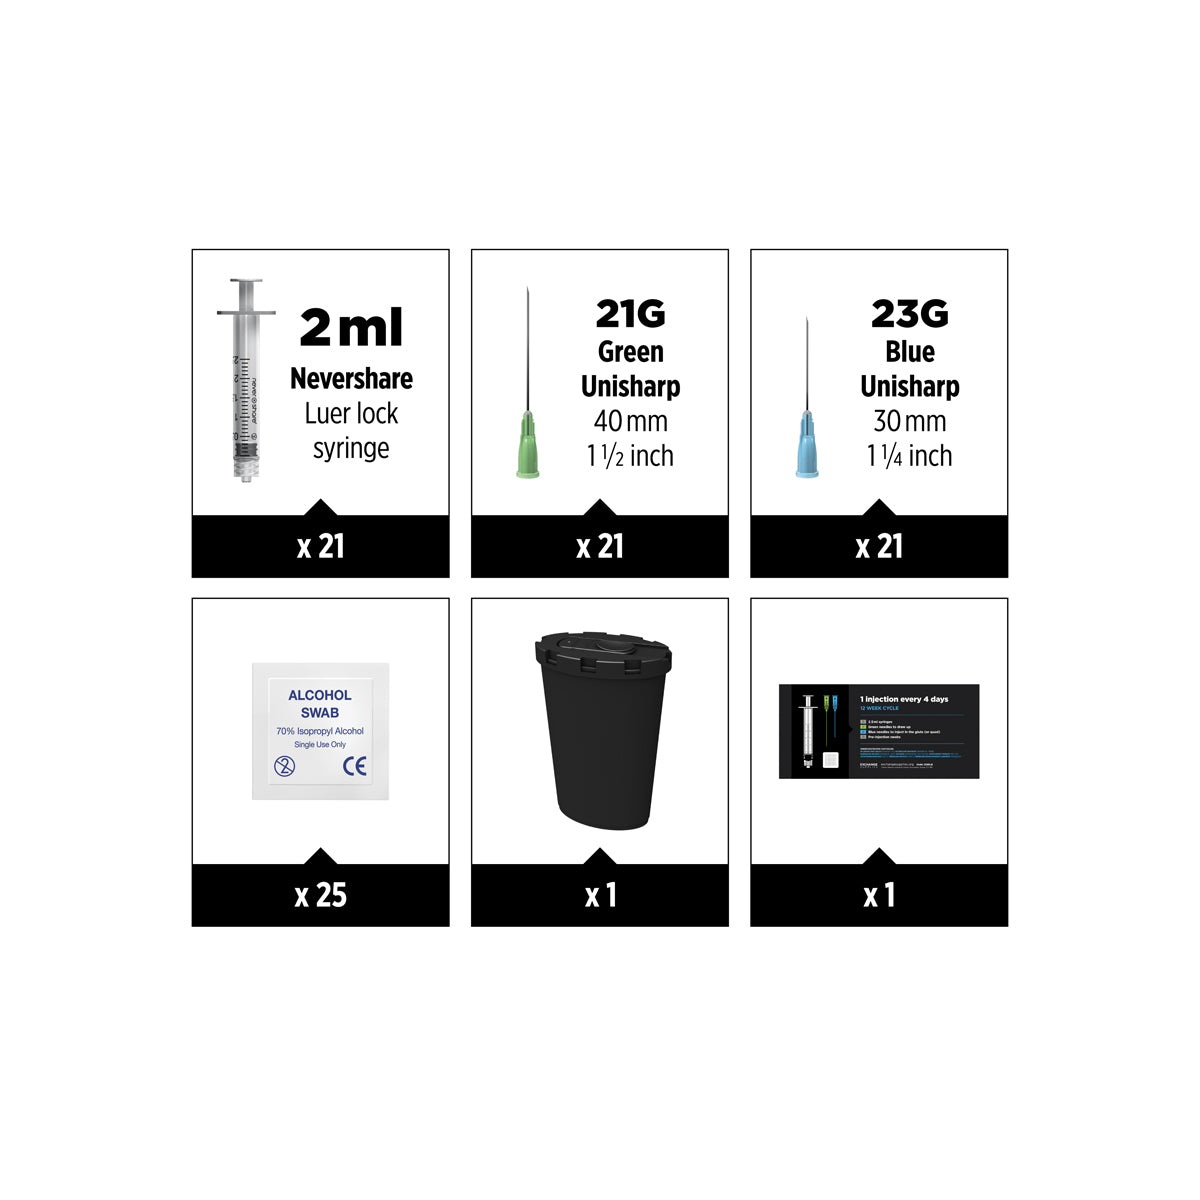 12 Week Cycle Kit | 1 Injection Every 4 Days